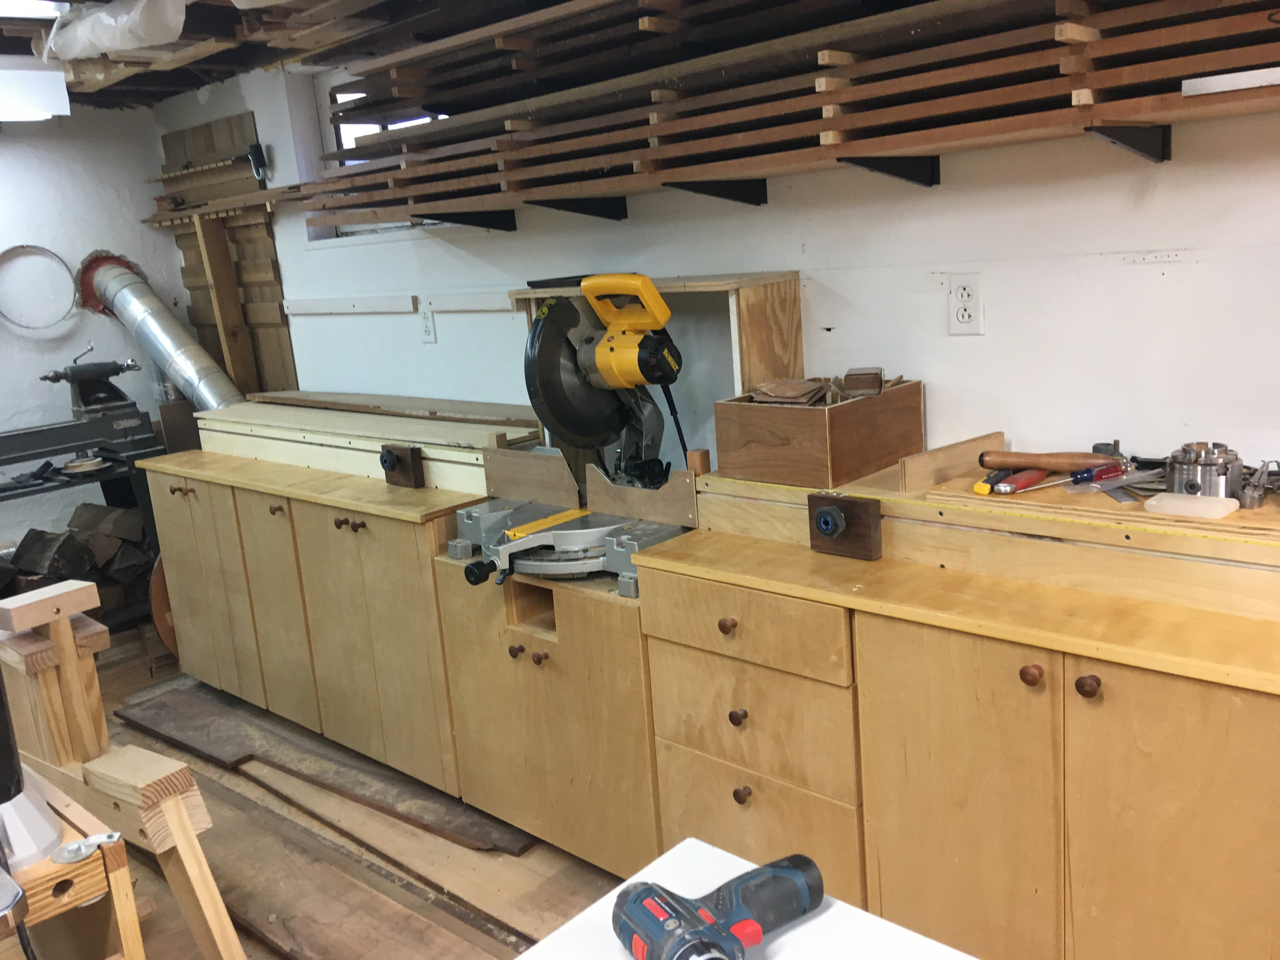 Miter saw station with completed fence